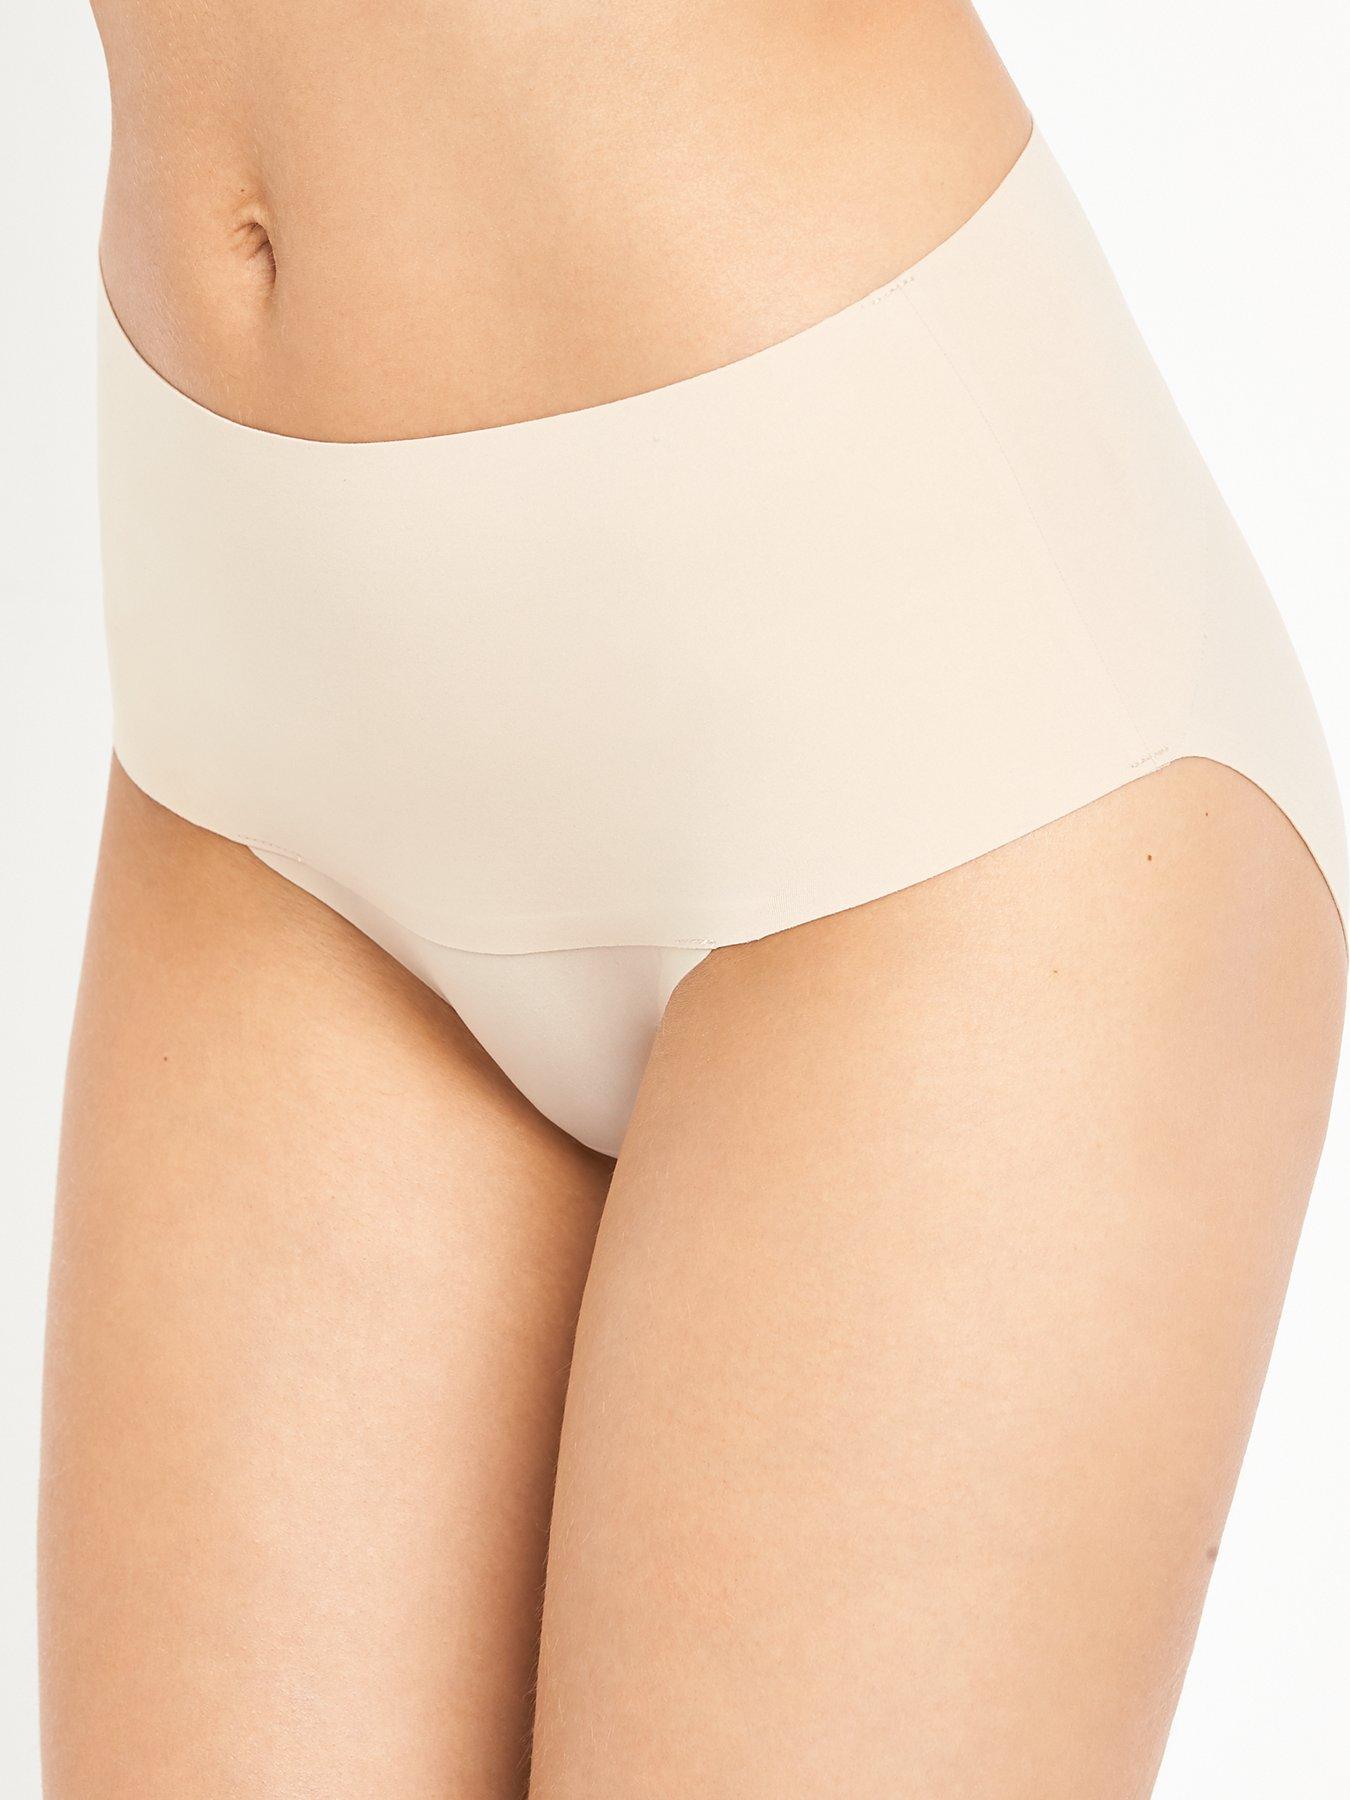 Spanx Everyday Shaping Women's Shaping Briefs, Naked 3.0 